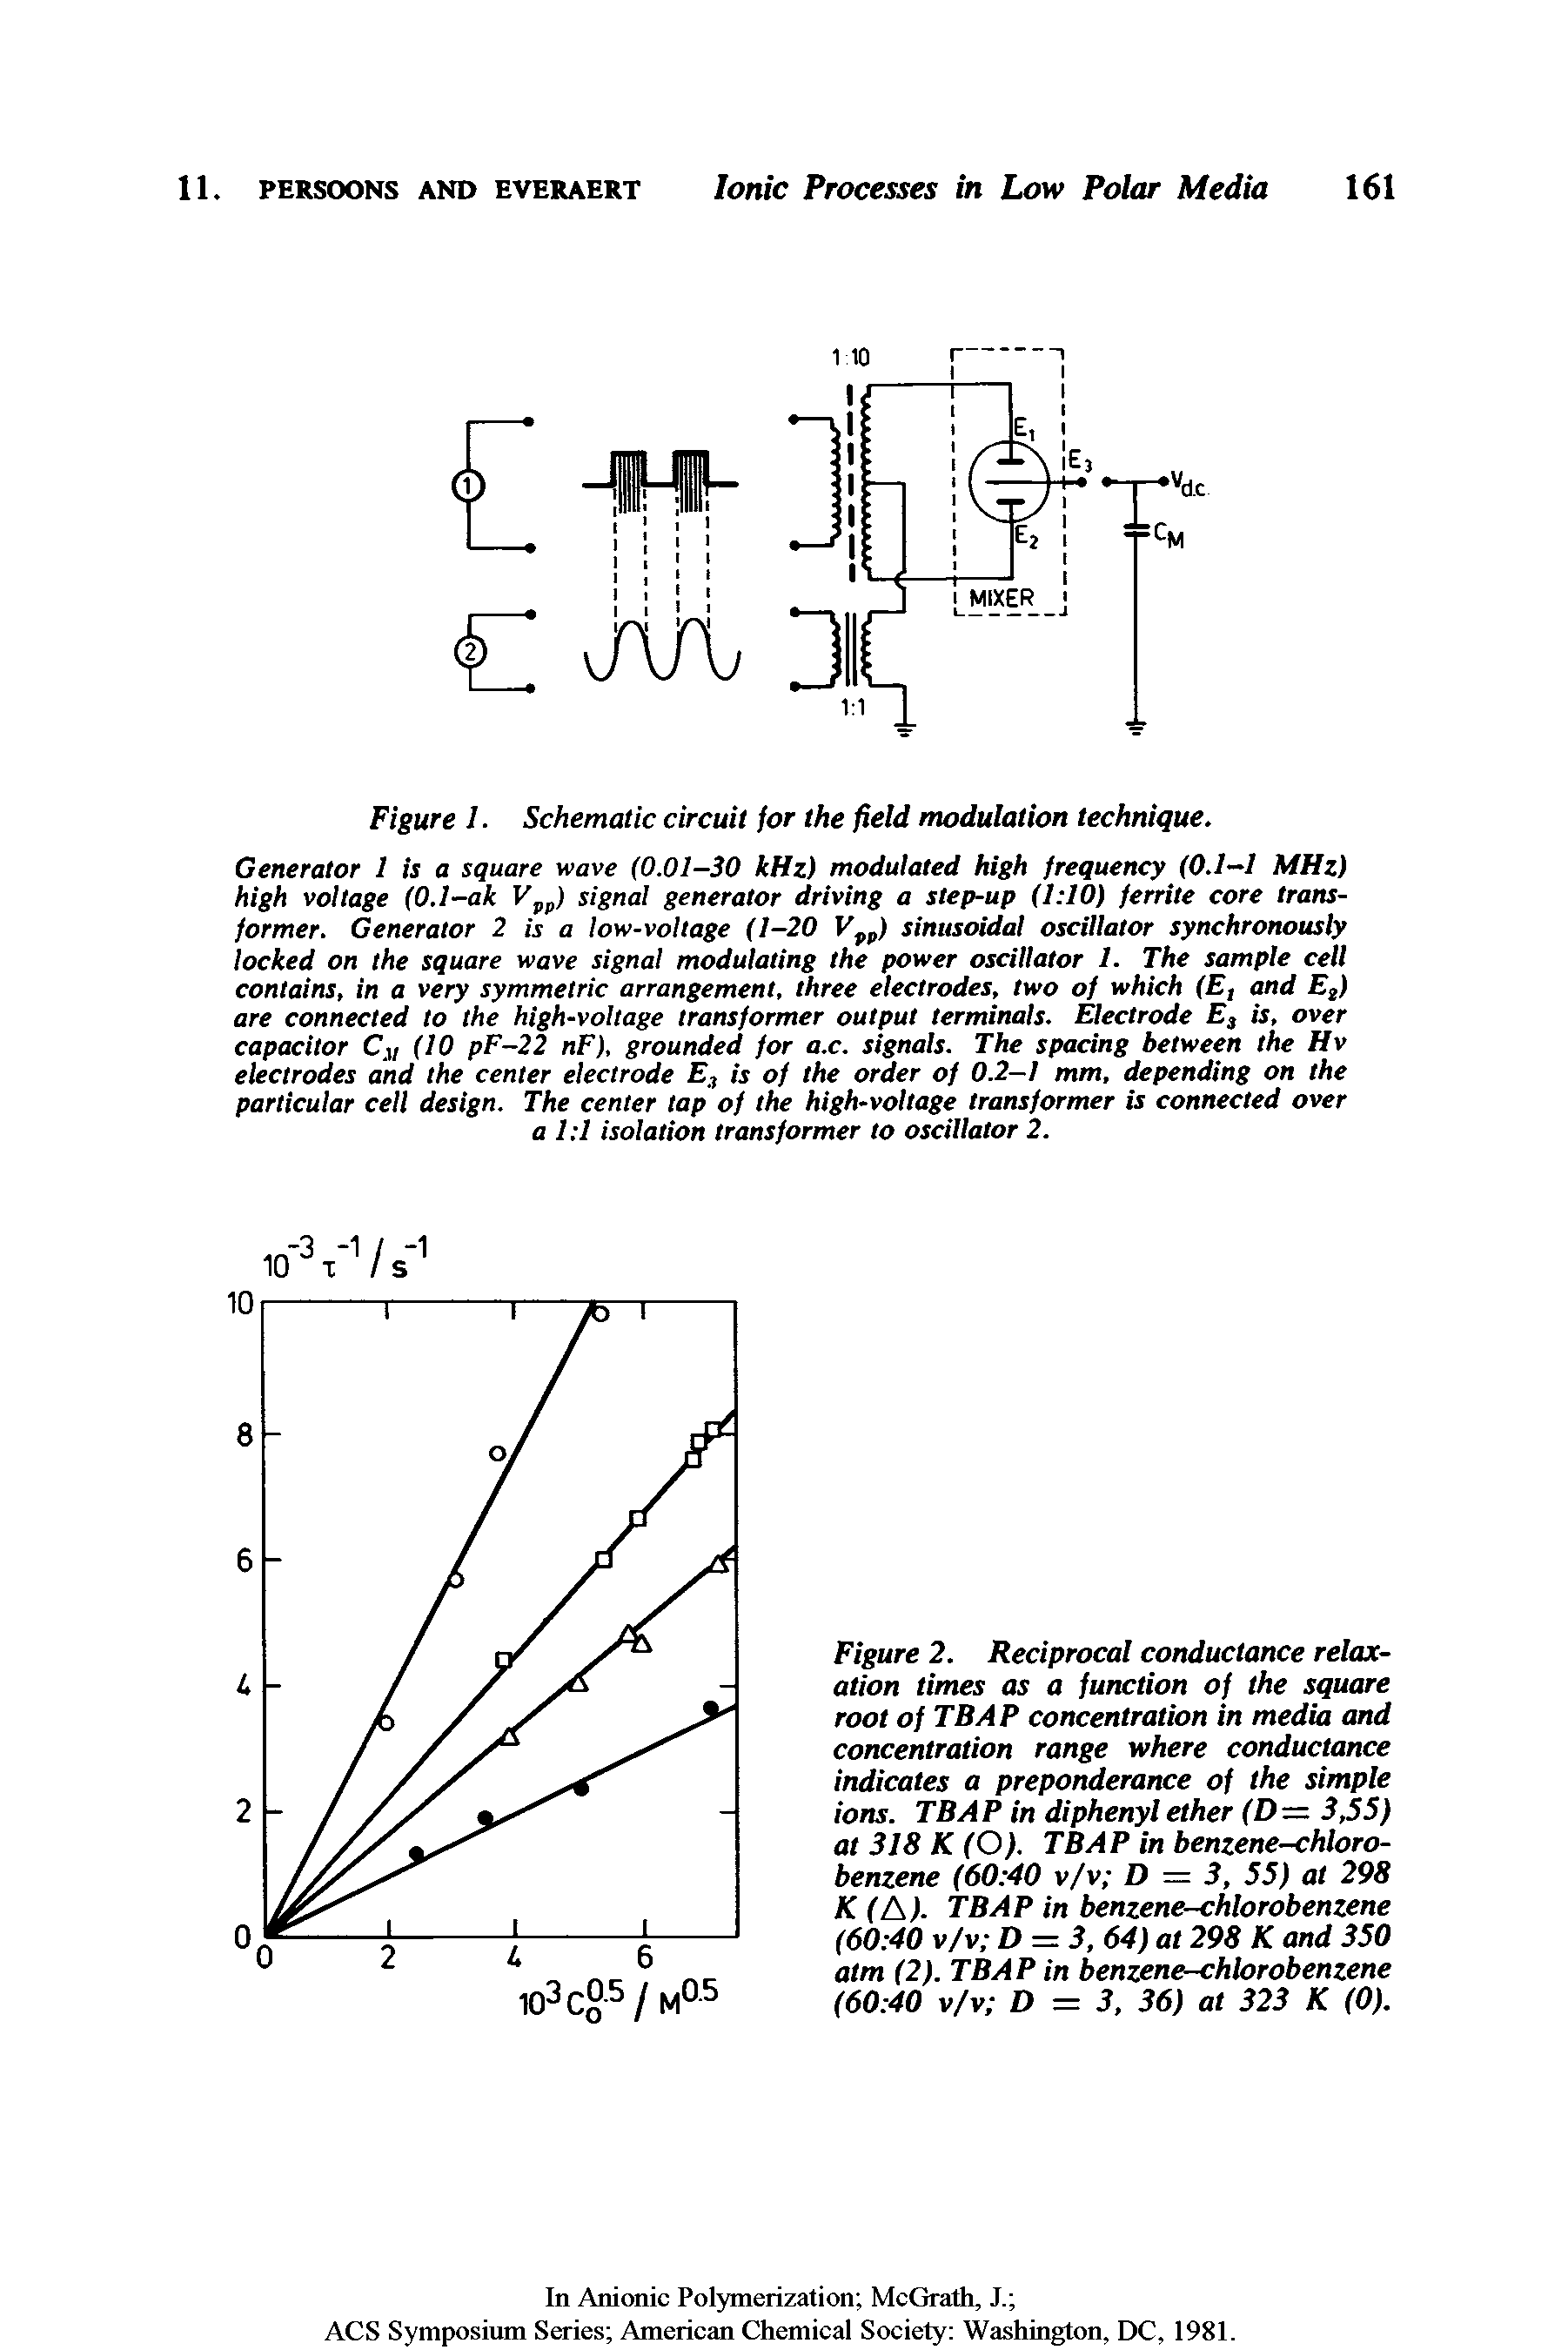 Figure 2. Reciprocal conductance relaxation times as a function of the square root of TBAP concentration in media and concentration range where conductance indicates a preponderance of the simple ions. TBAP in diphenyl ether (D— 3,55) at 318 ( ). TBAP in benzene-chlorobenzene (60 40 v/v D = 3, 55) at 298 (A). TBAP in benzene-chlorobenzene (60 40 v/v D = 3, 64) at 298 and 350 atm (2). TBAP in benzene-chlorobenzene (60 40 v/v D = 3, 36) at 323 (0).